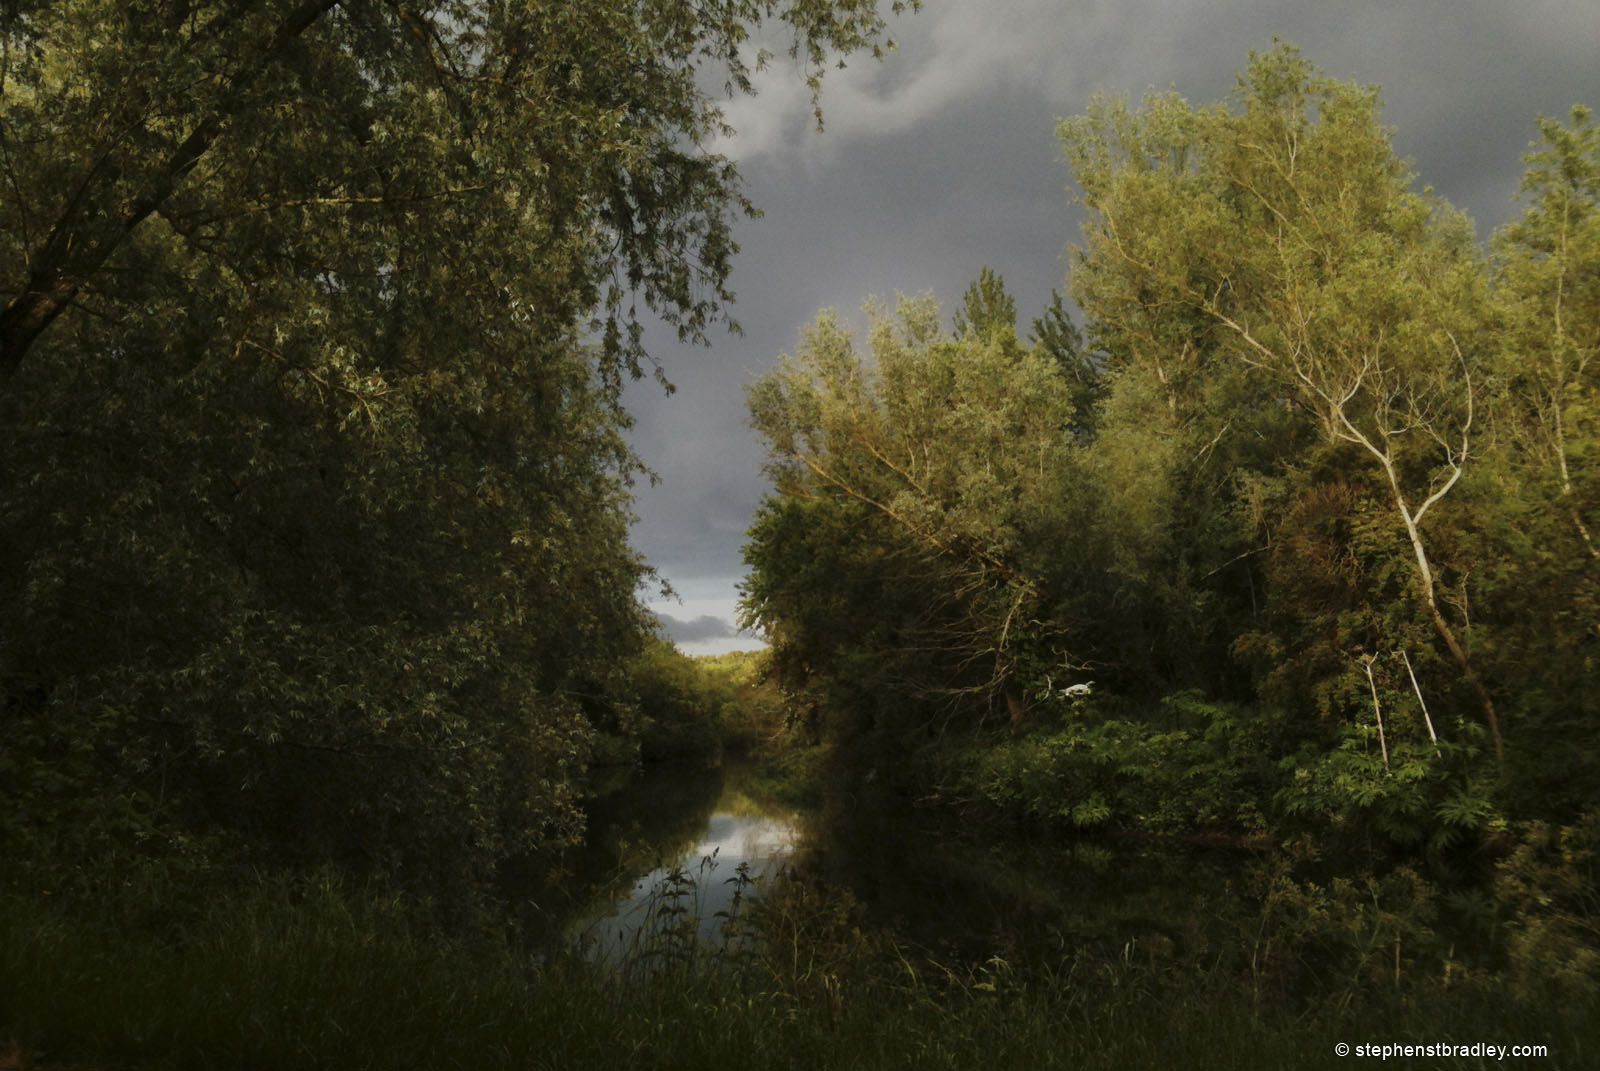 Landscape photograph of the Lagan Tow Path , Northern Ireland, by Stephen Bradley photographer - photograph 2508.